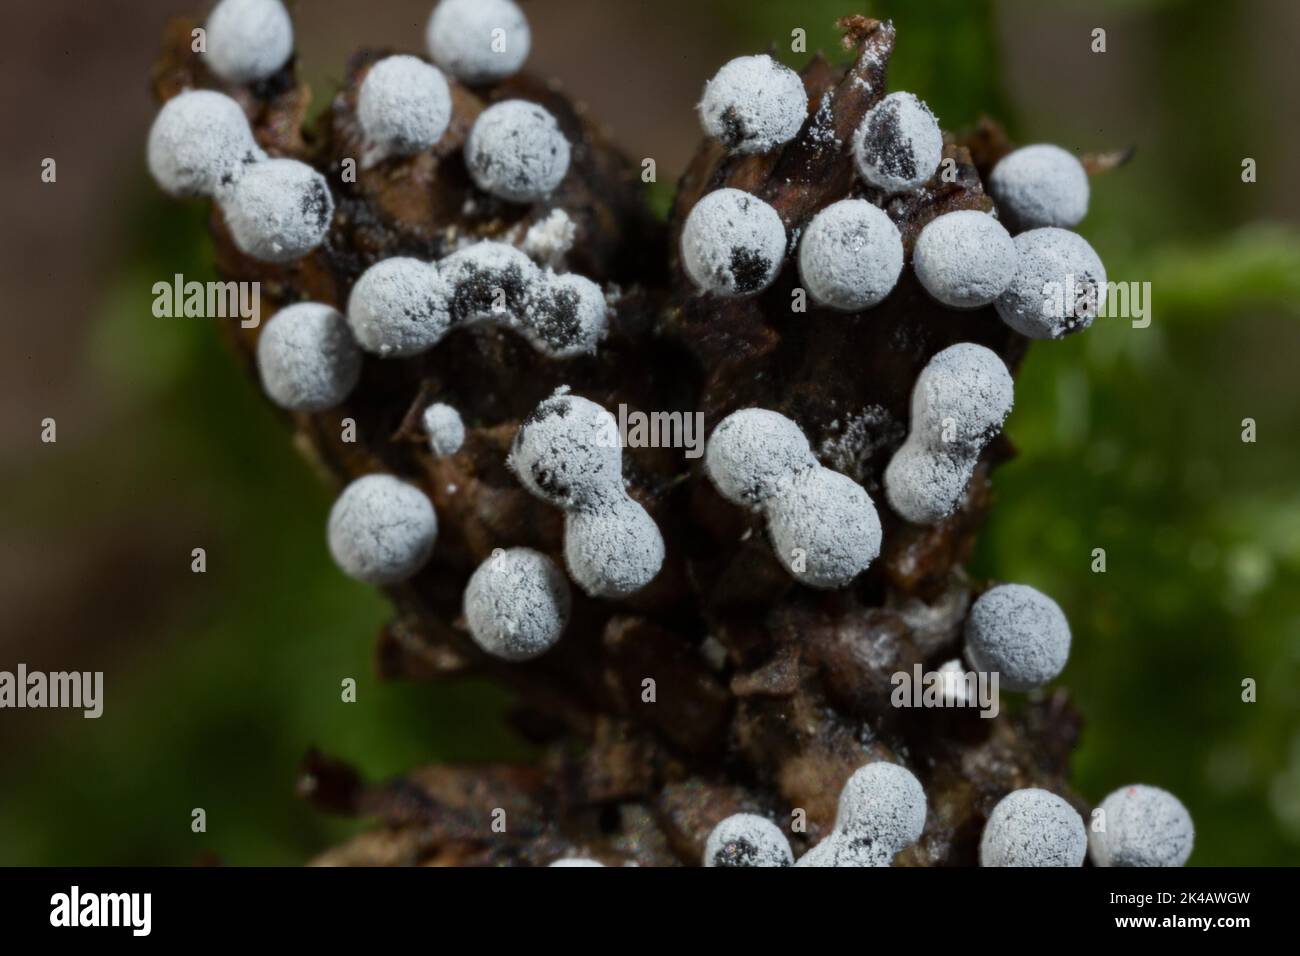 Grey globe slime mould several spherical greyish fruiting bodies next to each other on cones Stock Photo